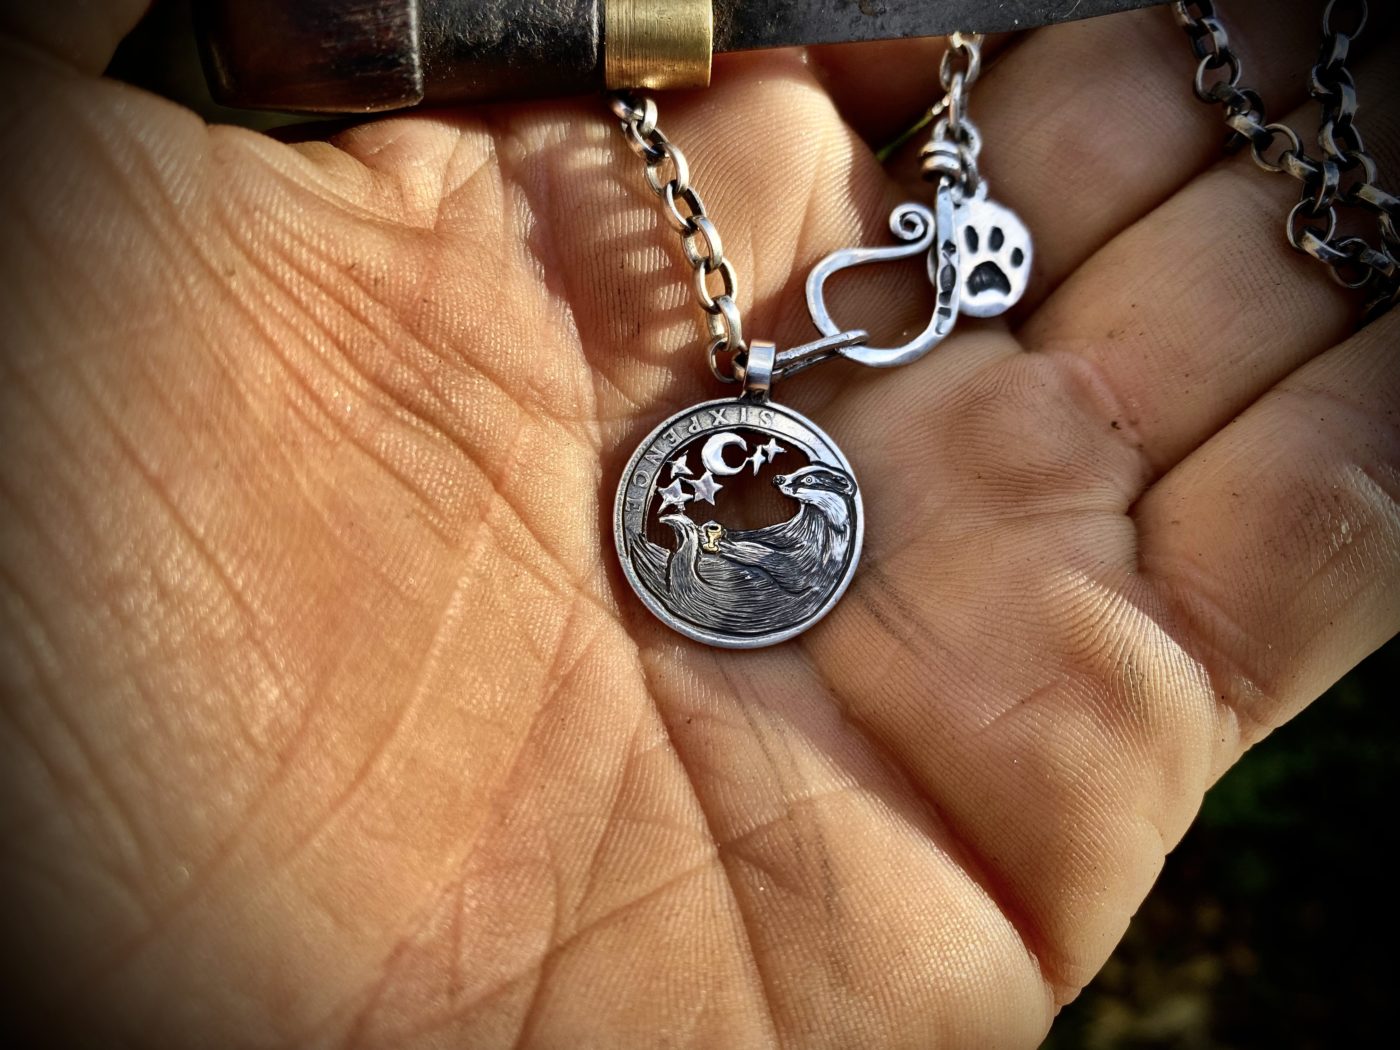 Handcrafted and recycled silver sixpence trufflehunter badger necklace totally handcrafted and recycled from old sterling silver shilling coins. Designed and created by Hairy Growler Jewellery, Cambridge, UK. necklace